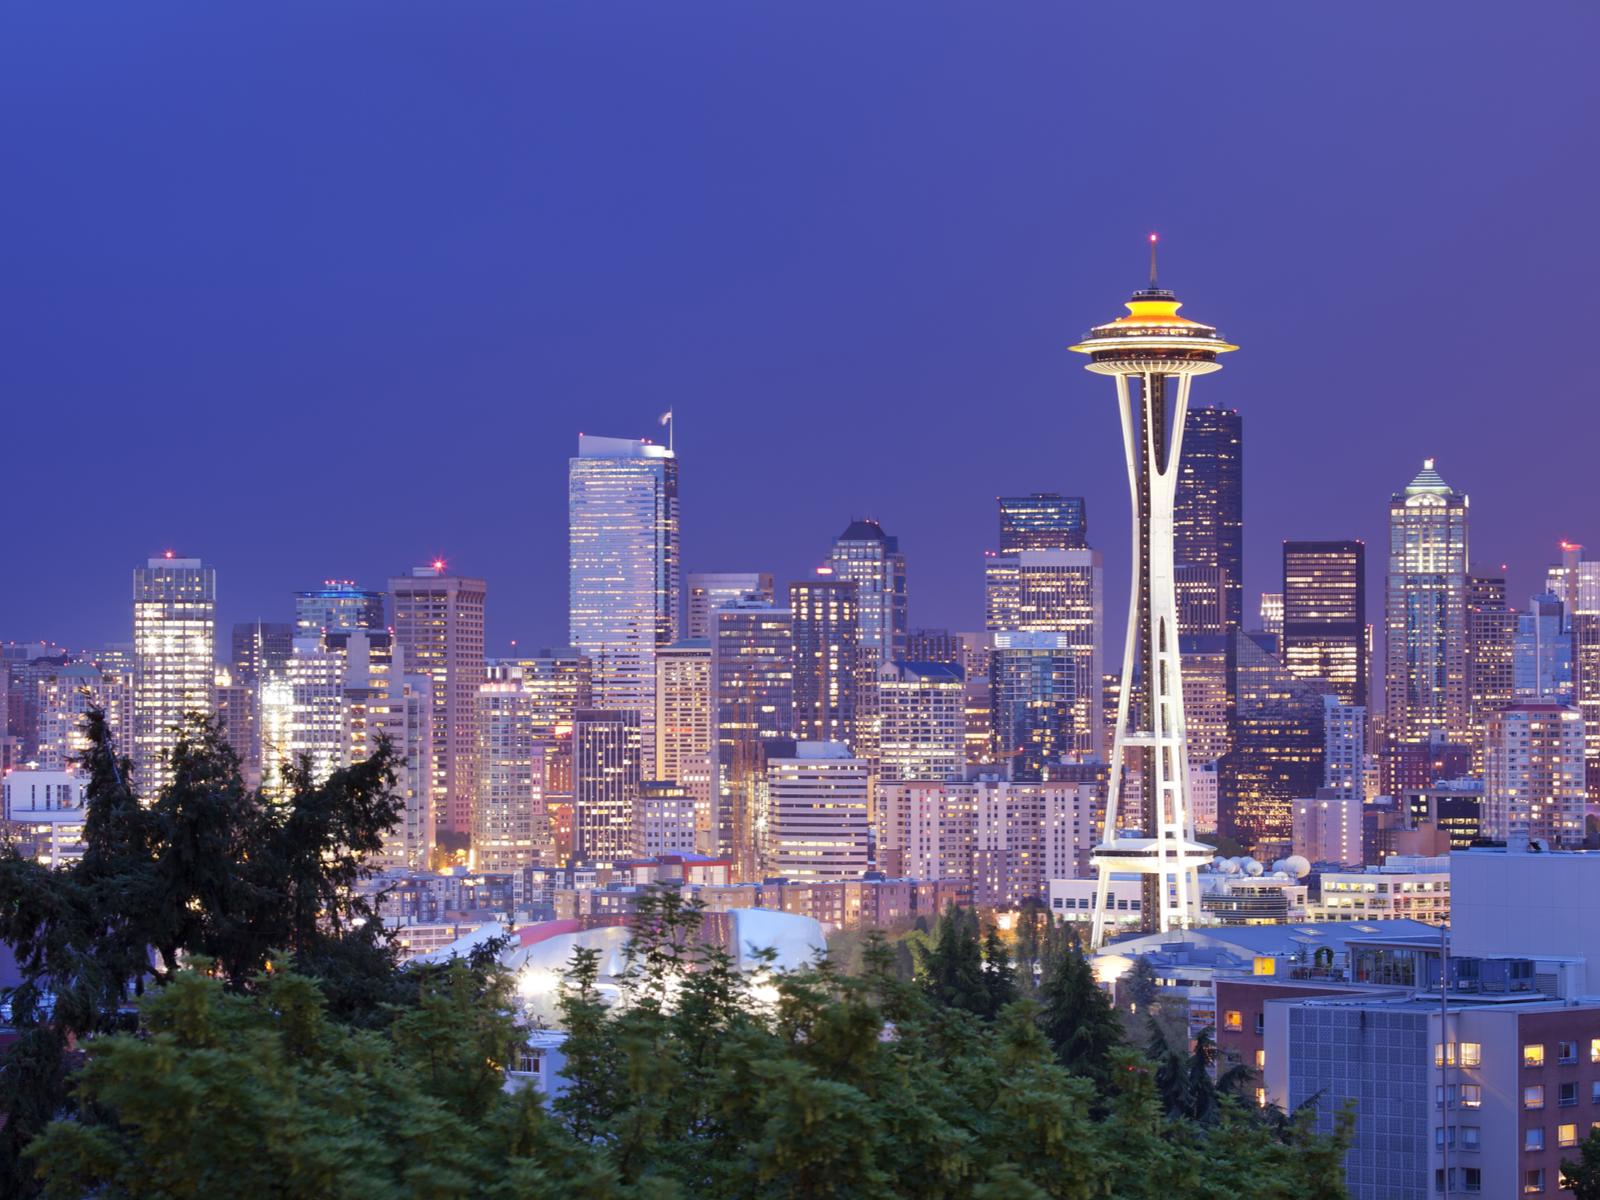 The Space Needle in Seattle, Washington is one of the most iconic places in America, standing above other structures and the Seattle skyline at night in background